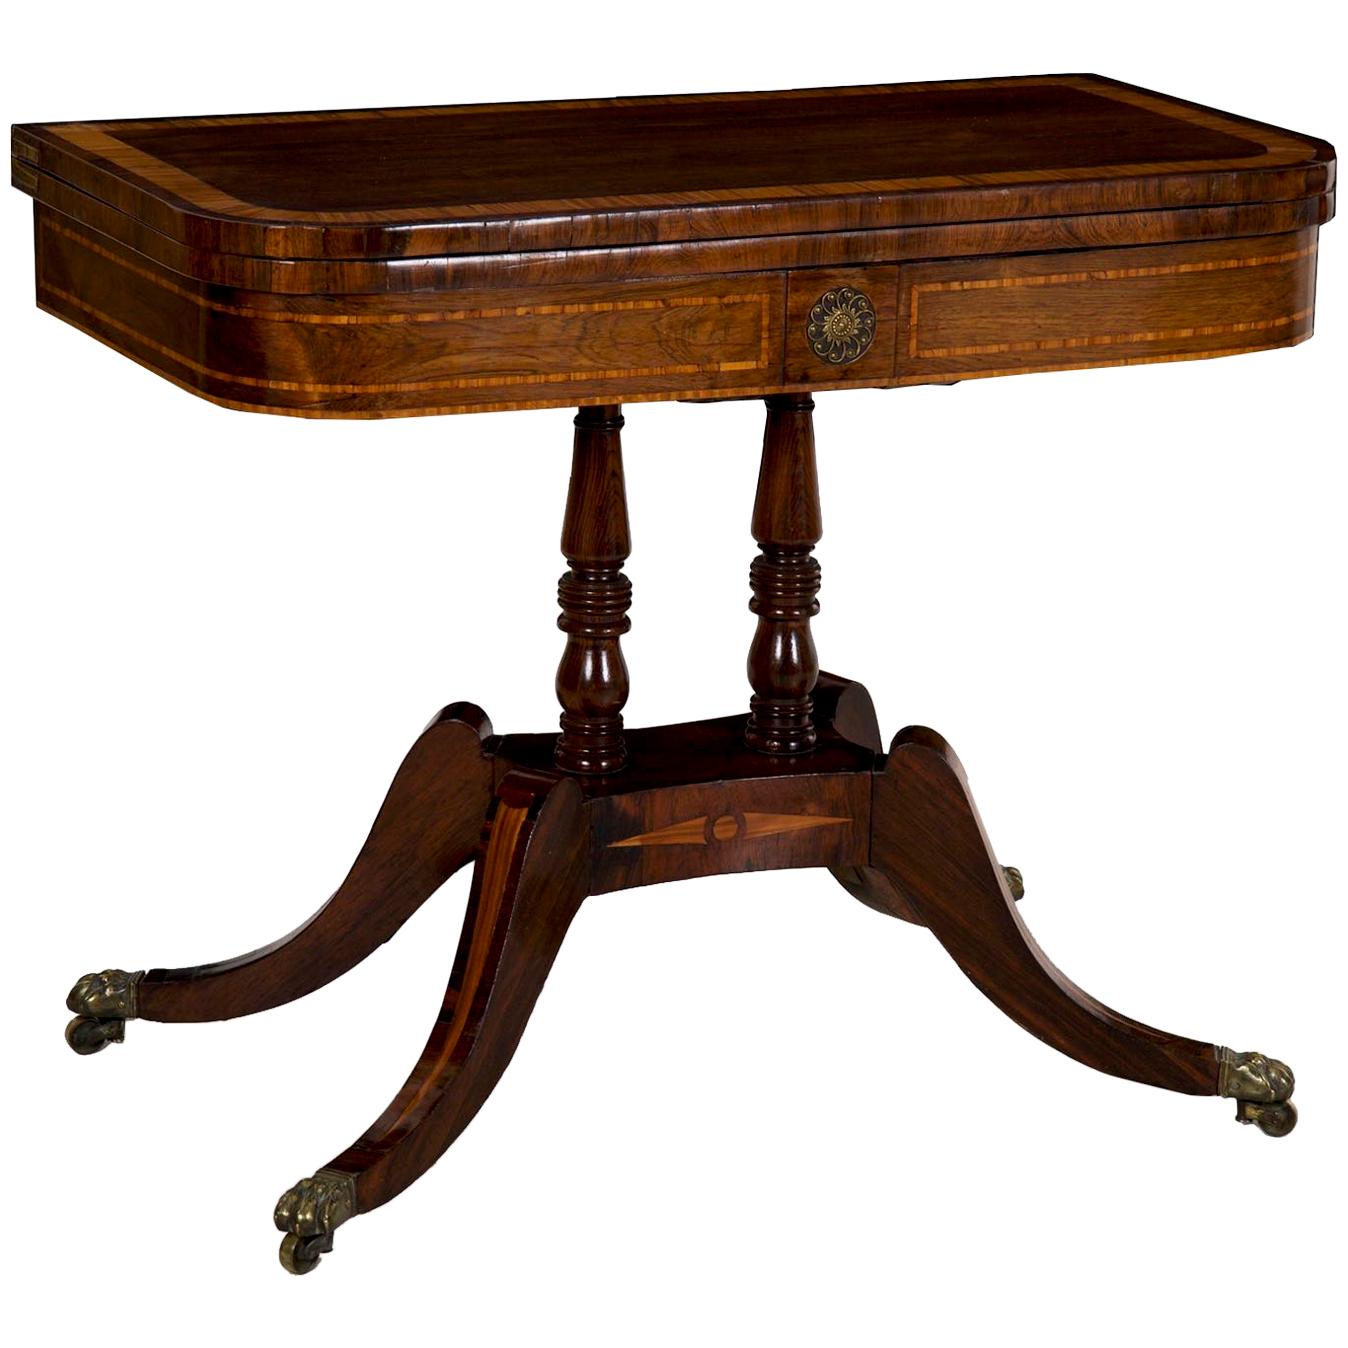 English Regency Rosewood Antique Games Card Table, circa 1815